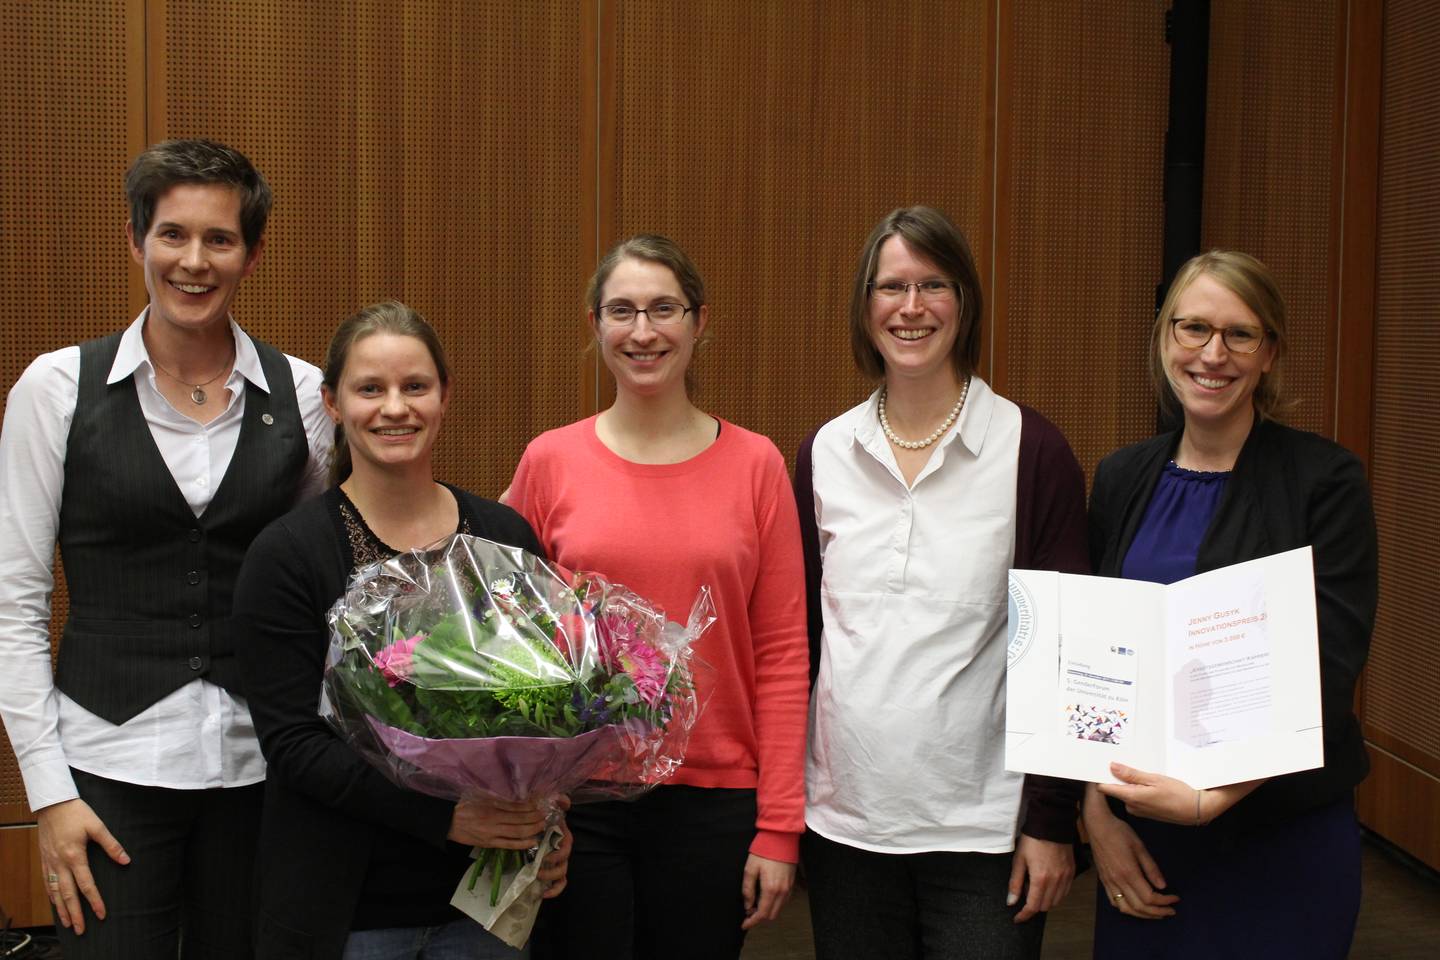 The winners of the "Innovation Award" together with Dipl.- Soz. Päd.'. Annelene Gäckle.